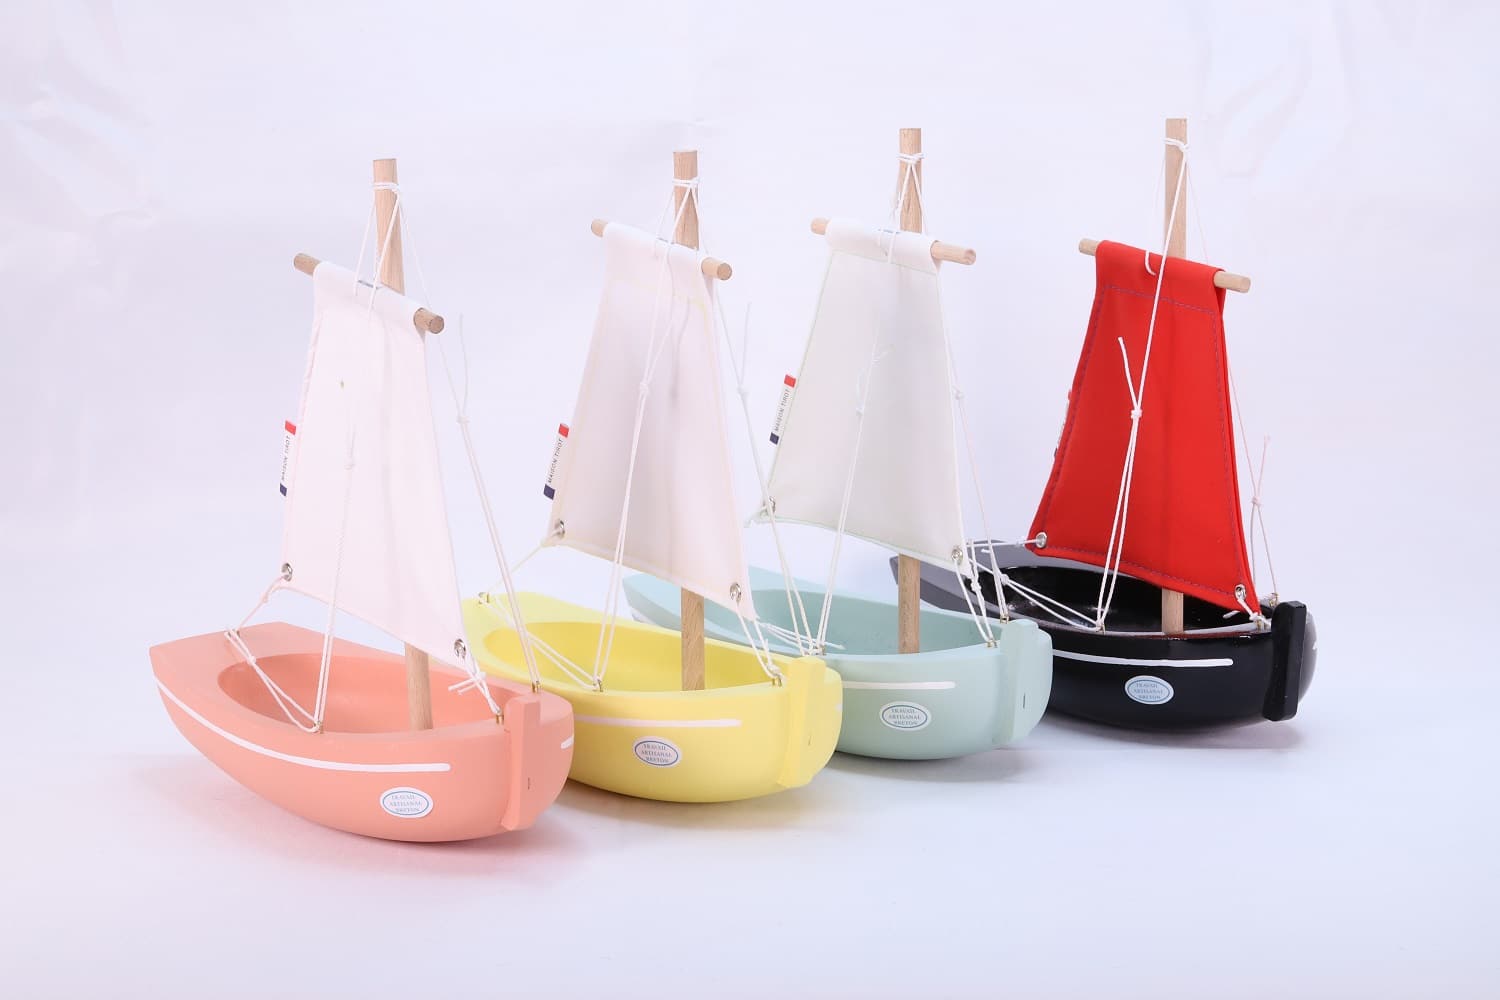 Model Boat Wooden Miniature Boat Small Wooden Boat Small Fishing Boat with  Canopy Boat Children's Toy Solid Wood Boat Decoration